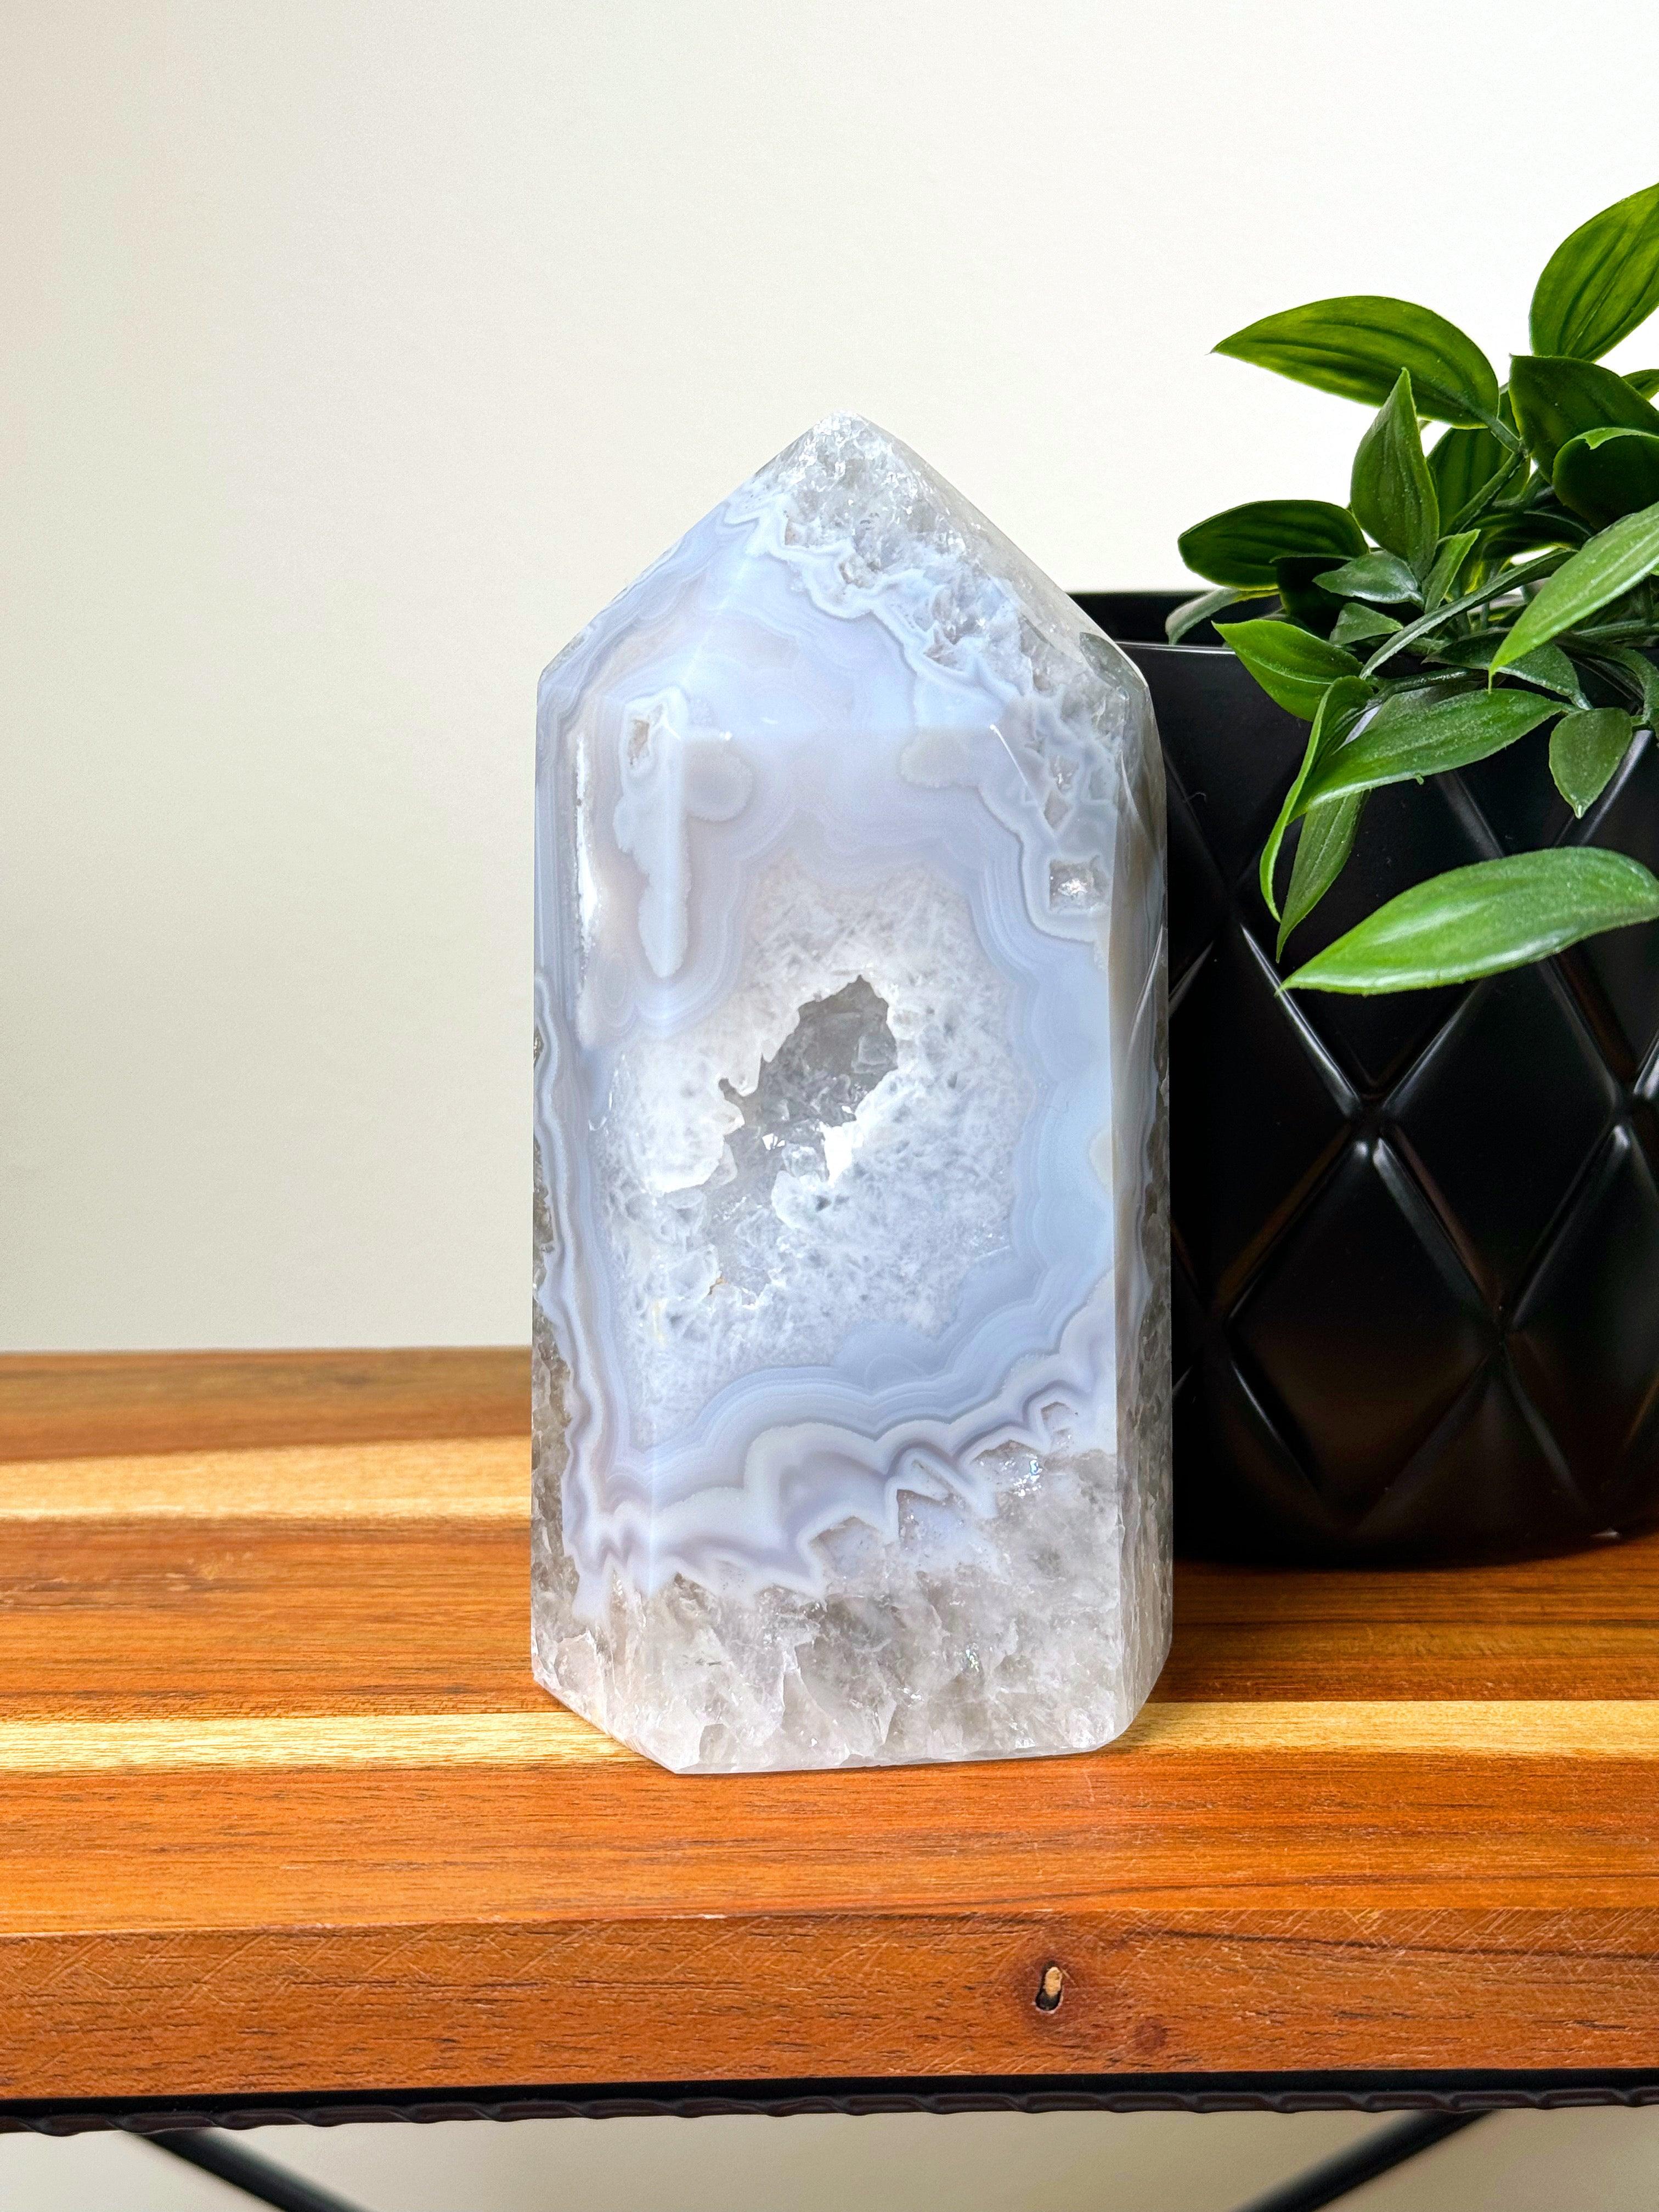 DRUZY AGATE TOWER 4 - agate, druzy agate, googly agate, googly eye, googly eye agate, one of a kind, point, statement piece, tower - The Mineral Maven